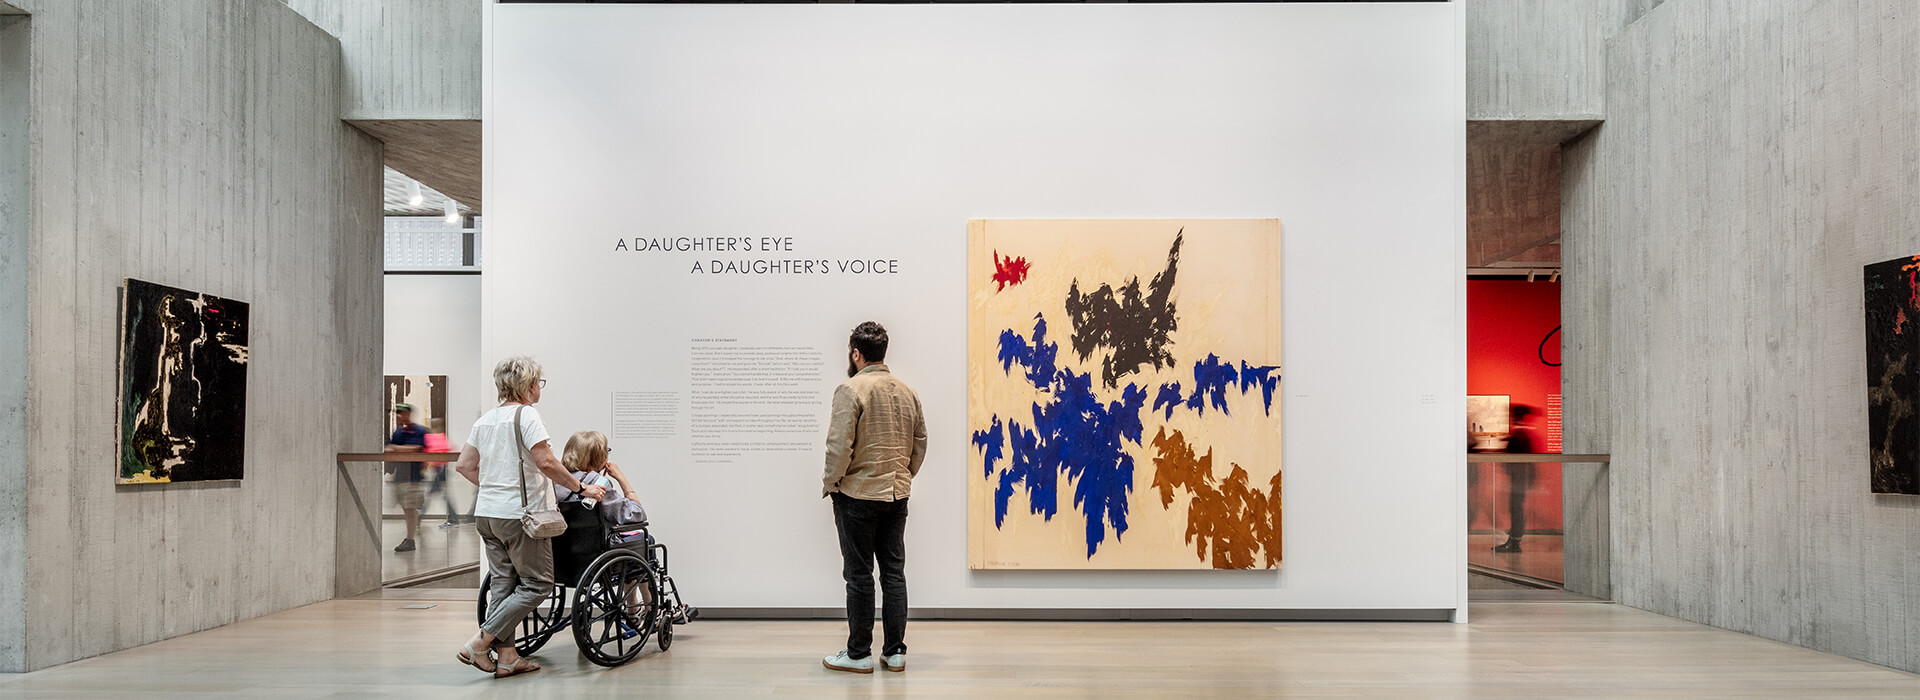 Guests at the Clyfford Still Museum look at text on the wall next to a painting